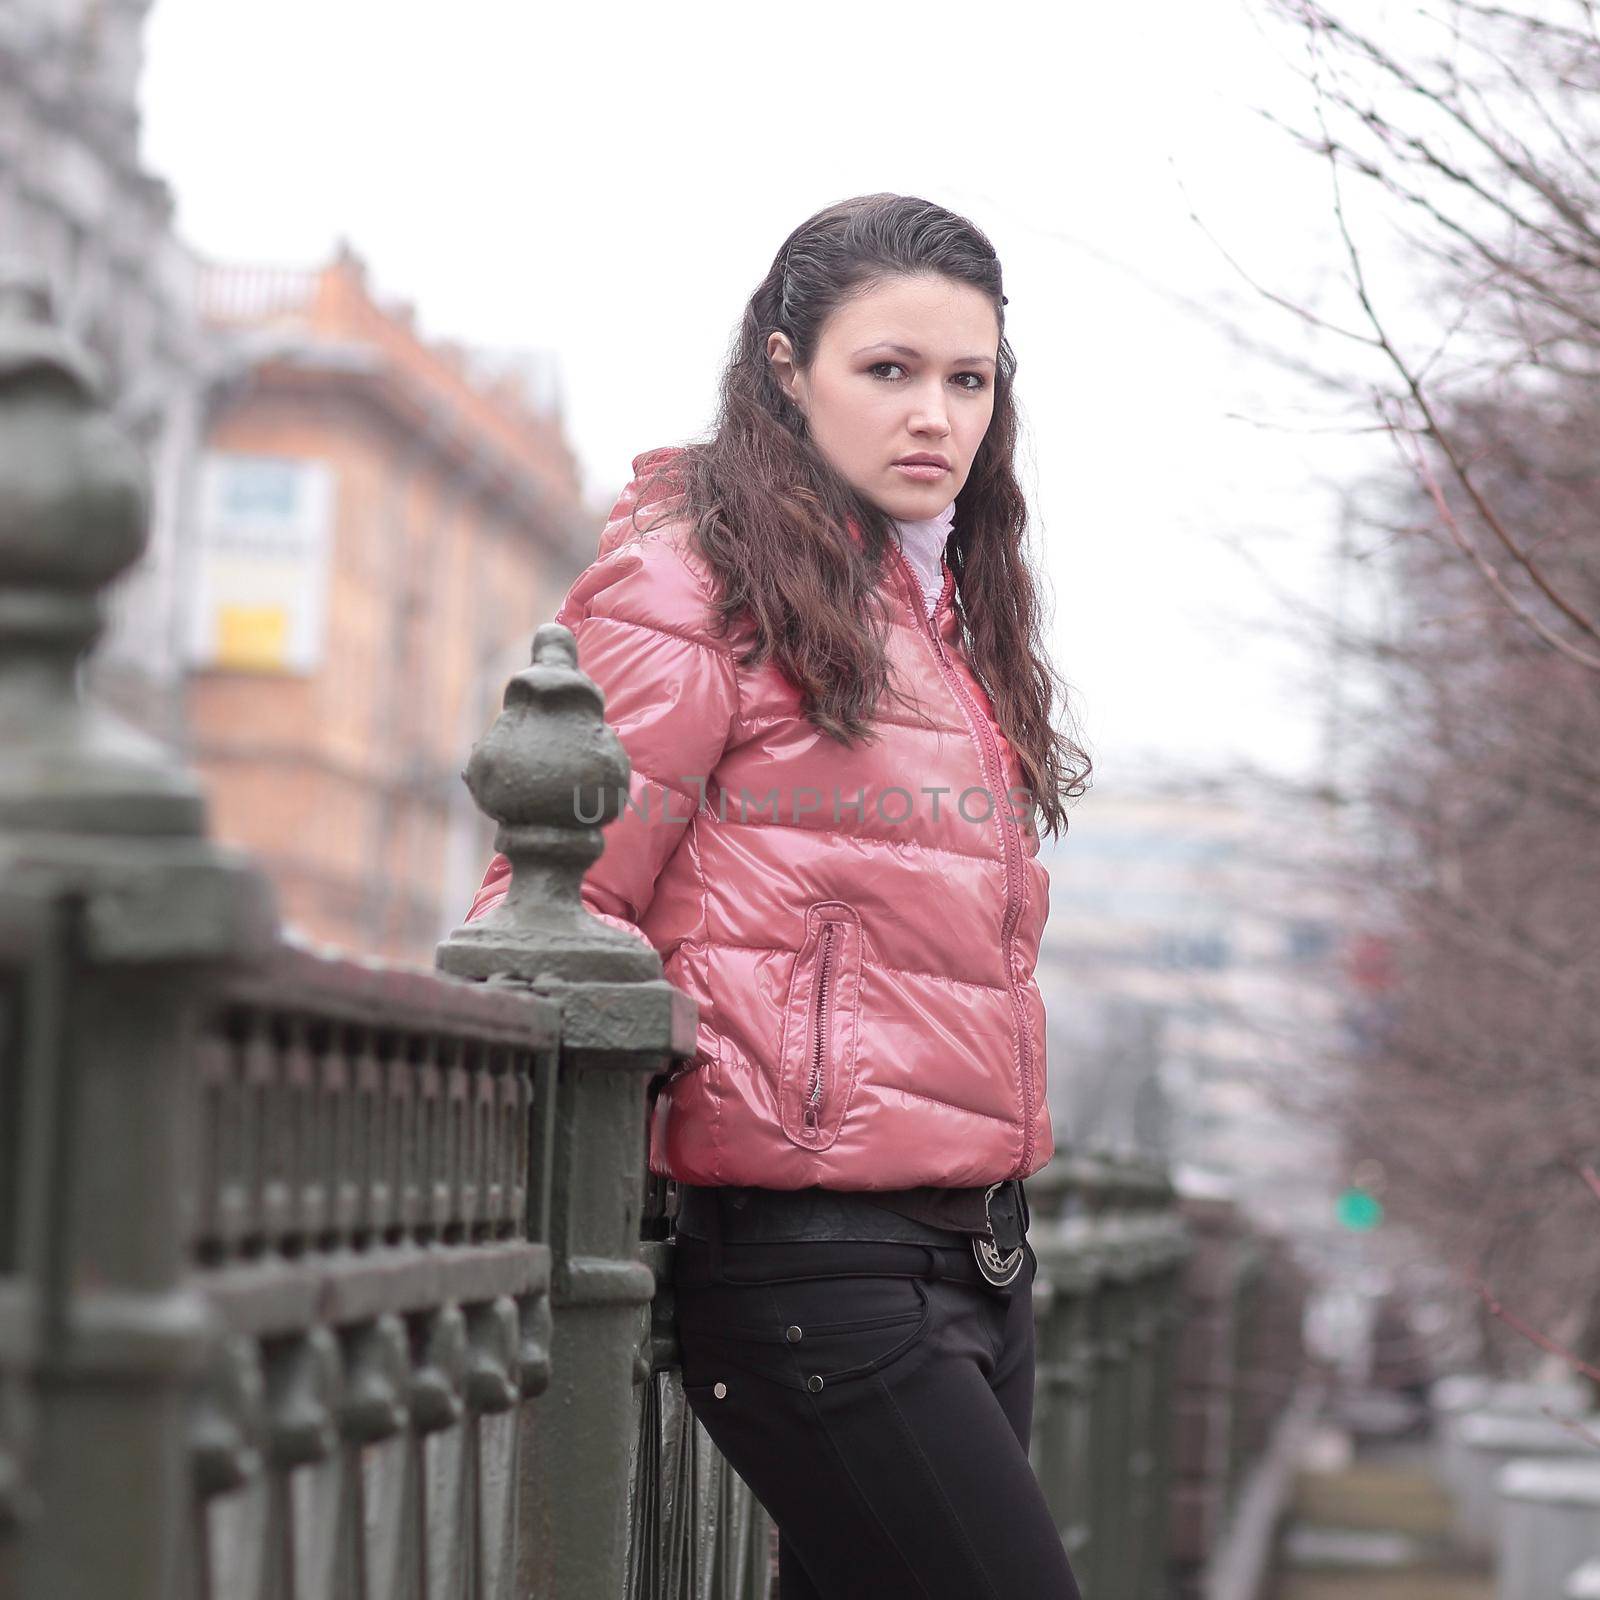 young woman standing on a bridge in the city by SmartPhotoLab